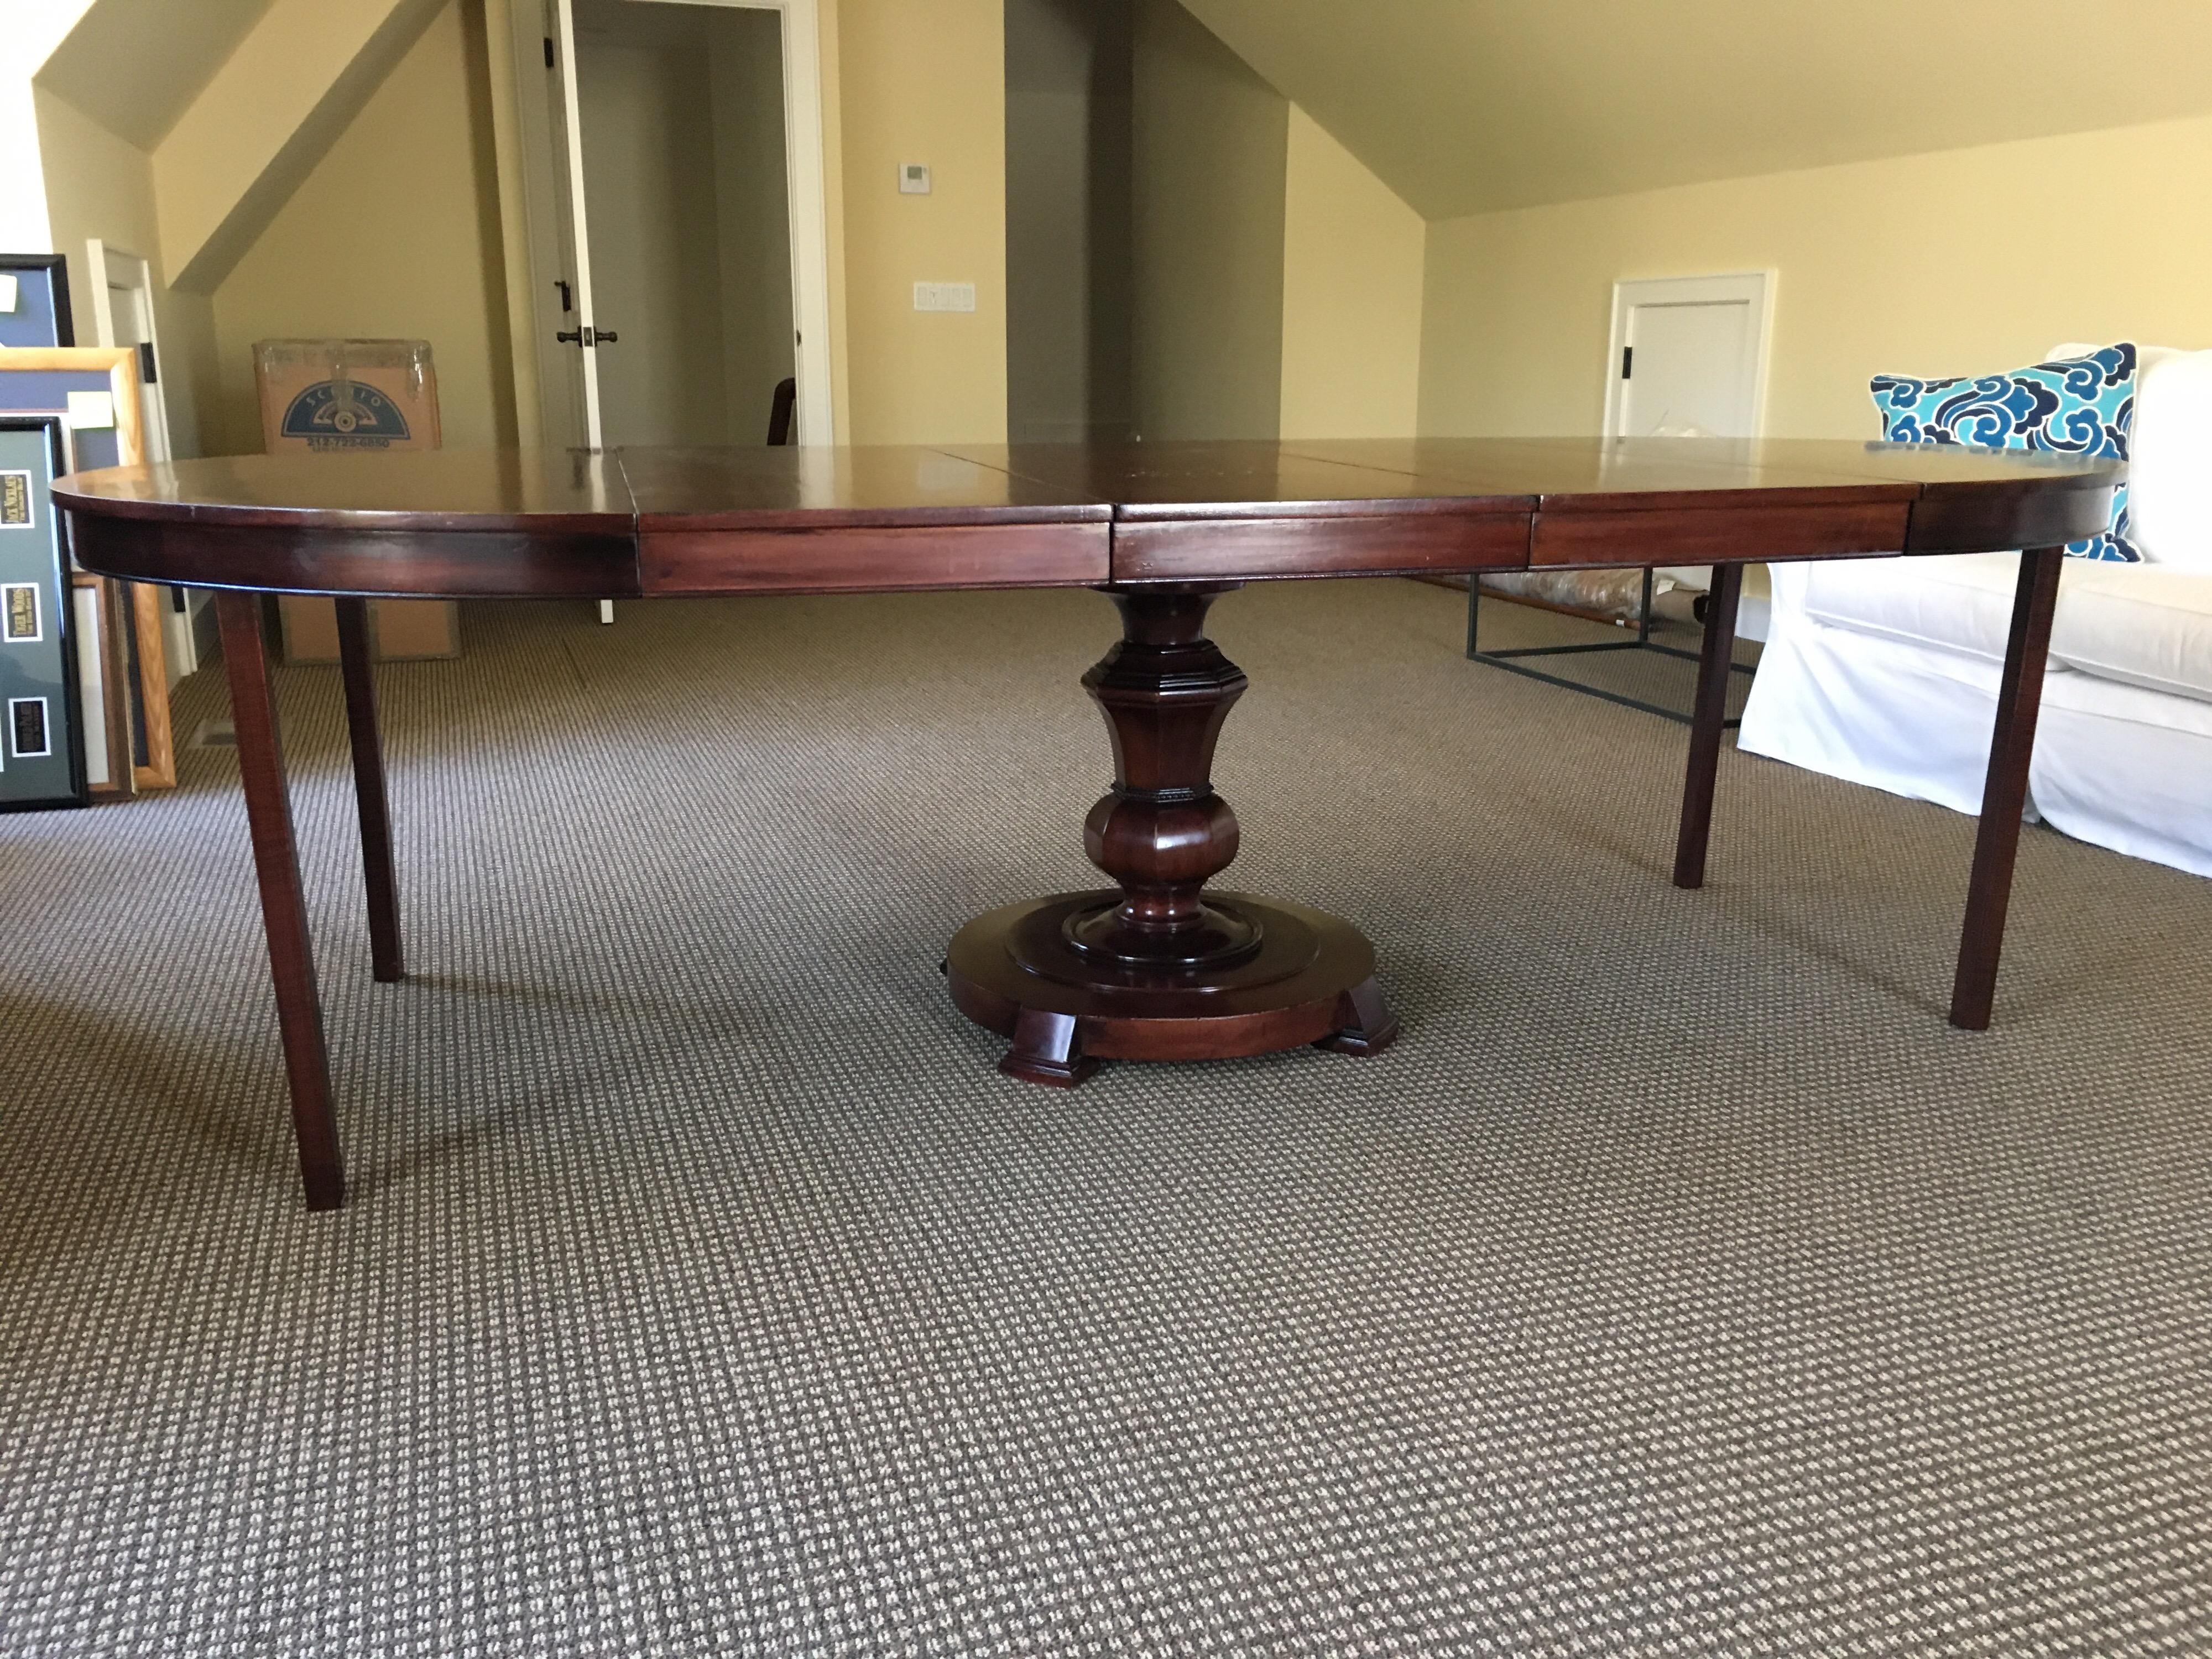 Regency style round rosewood center or dining table, 1950s by Maitland Ward, ebony banding.
48